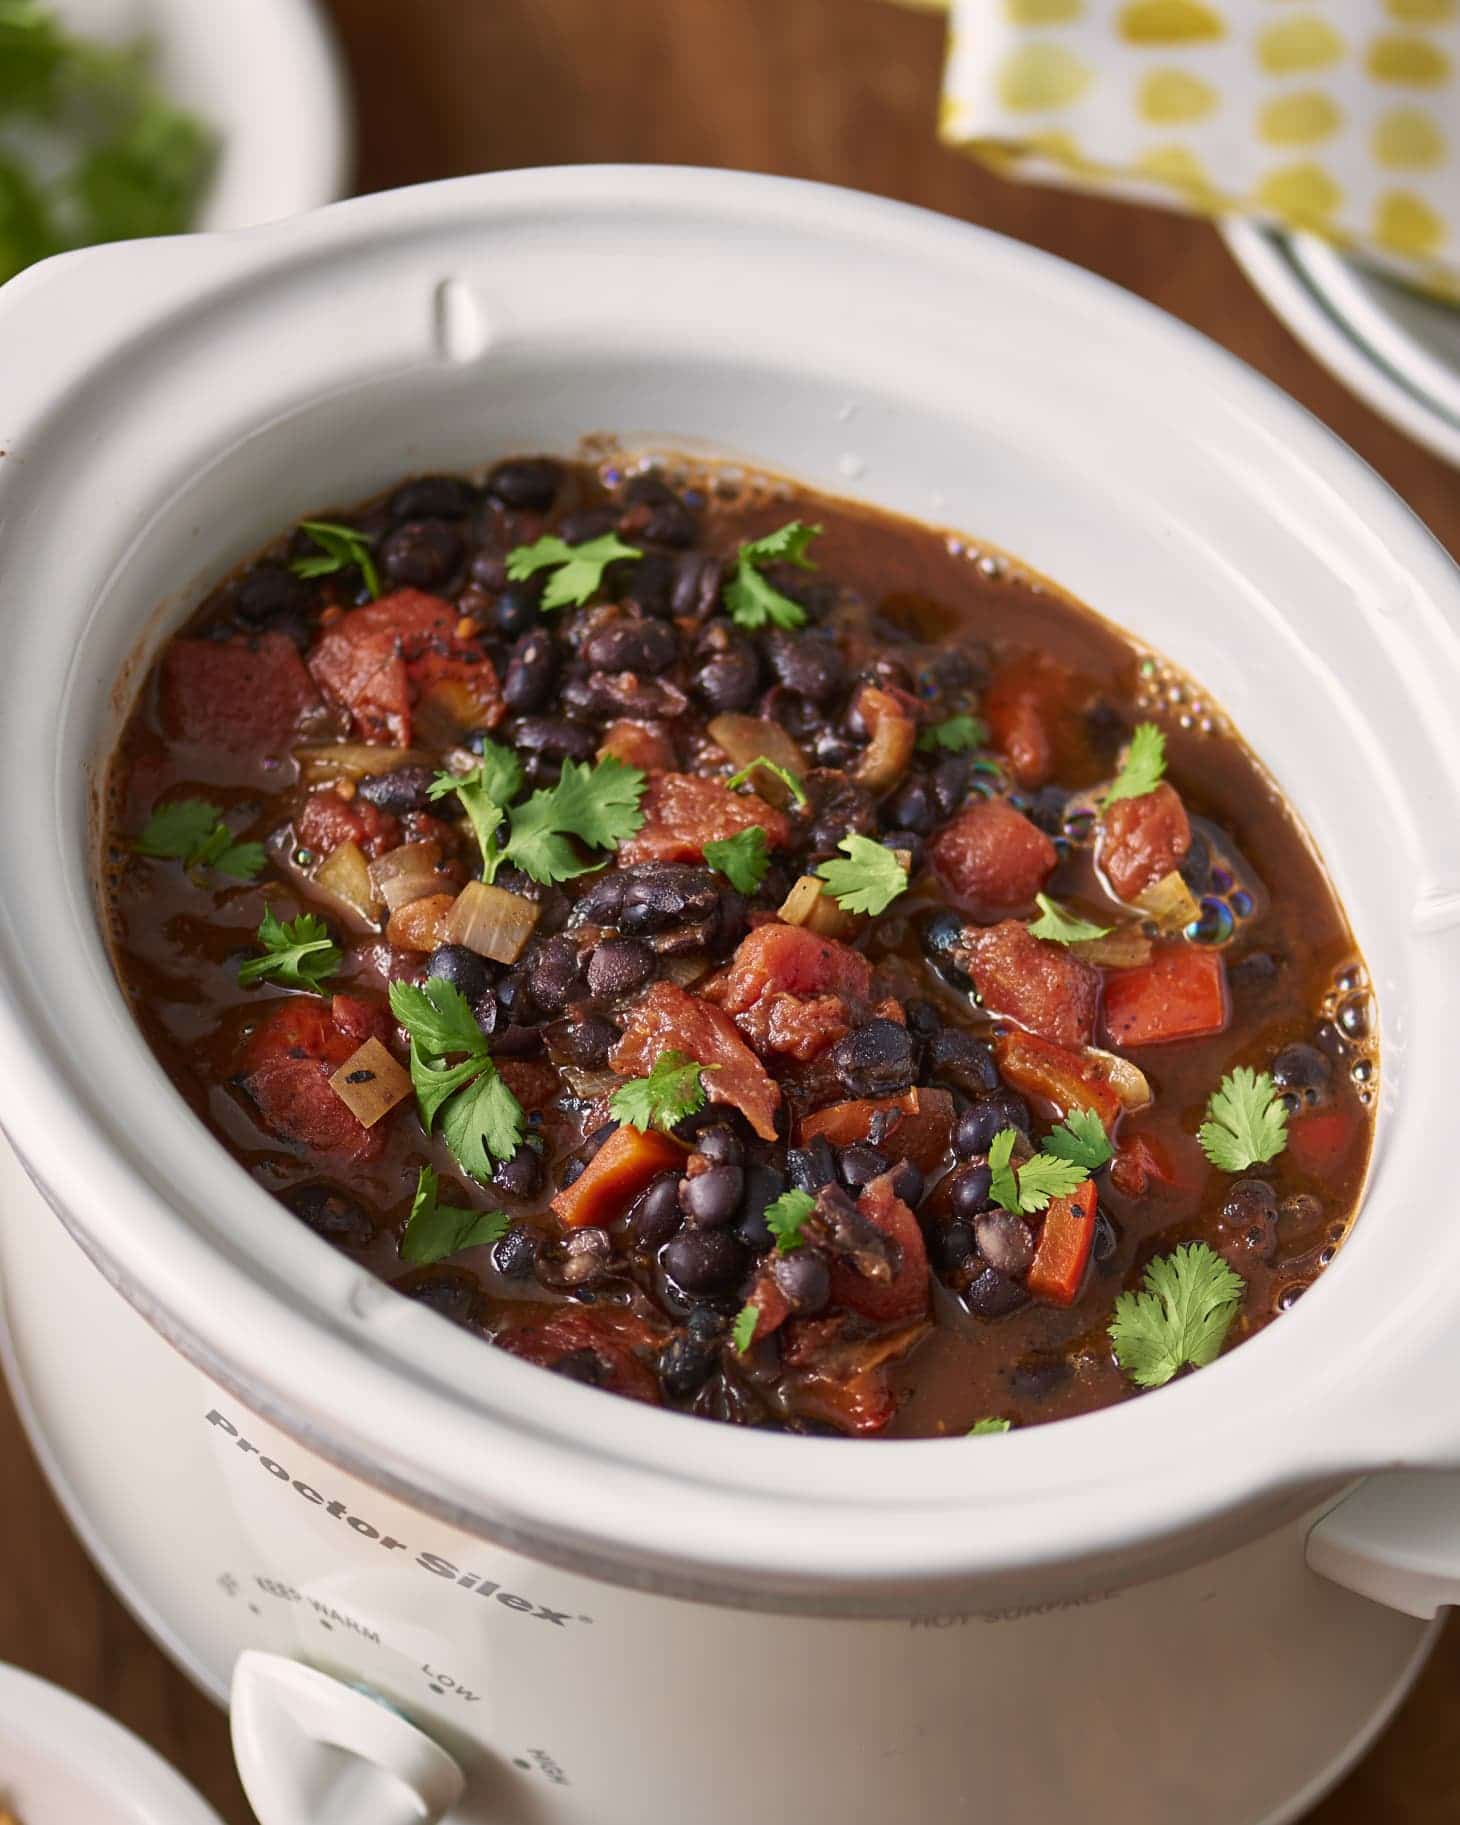 Slow Cooker Black Bean Chili from The Kitchn